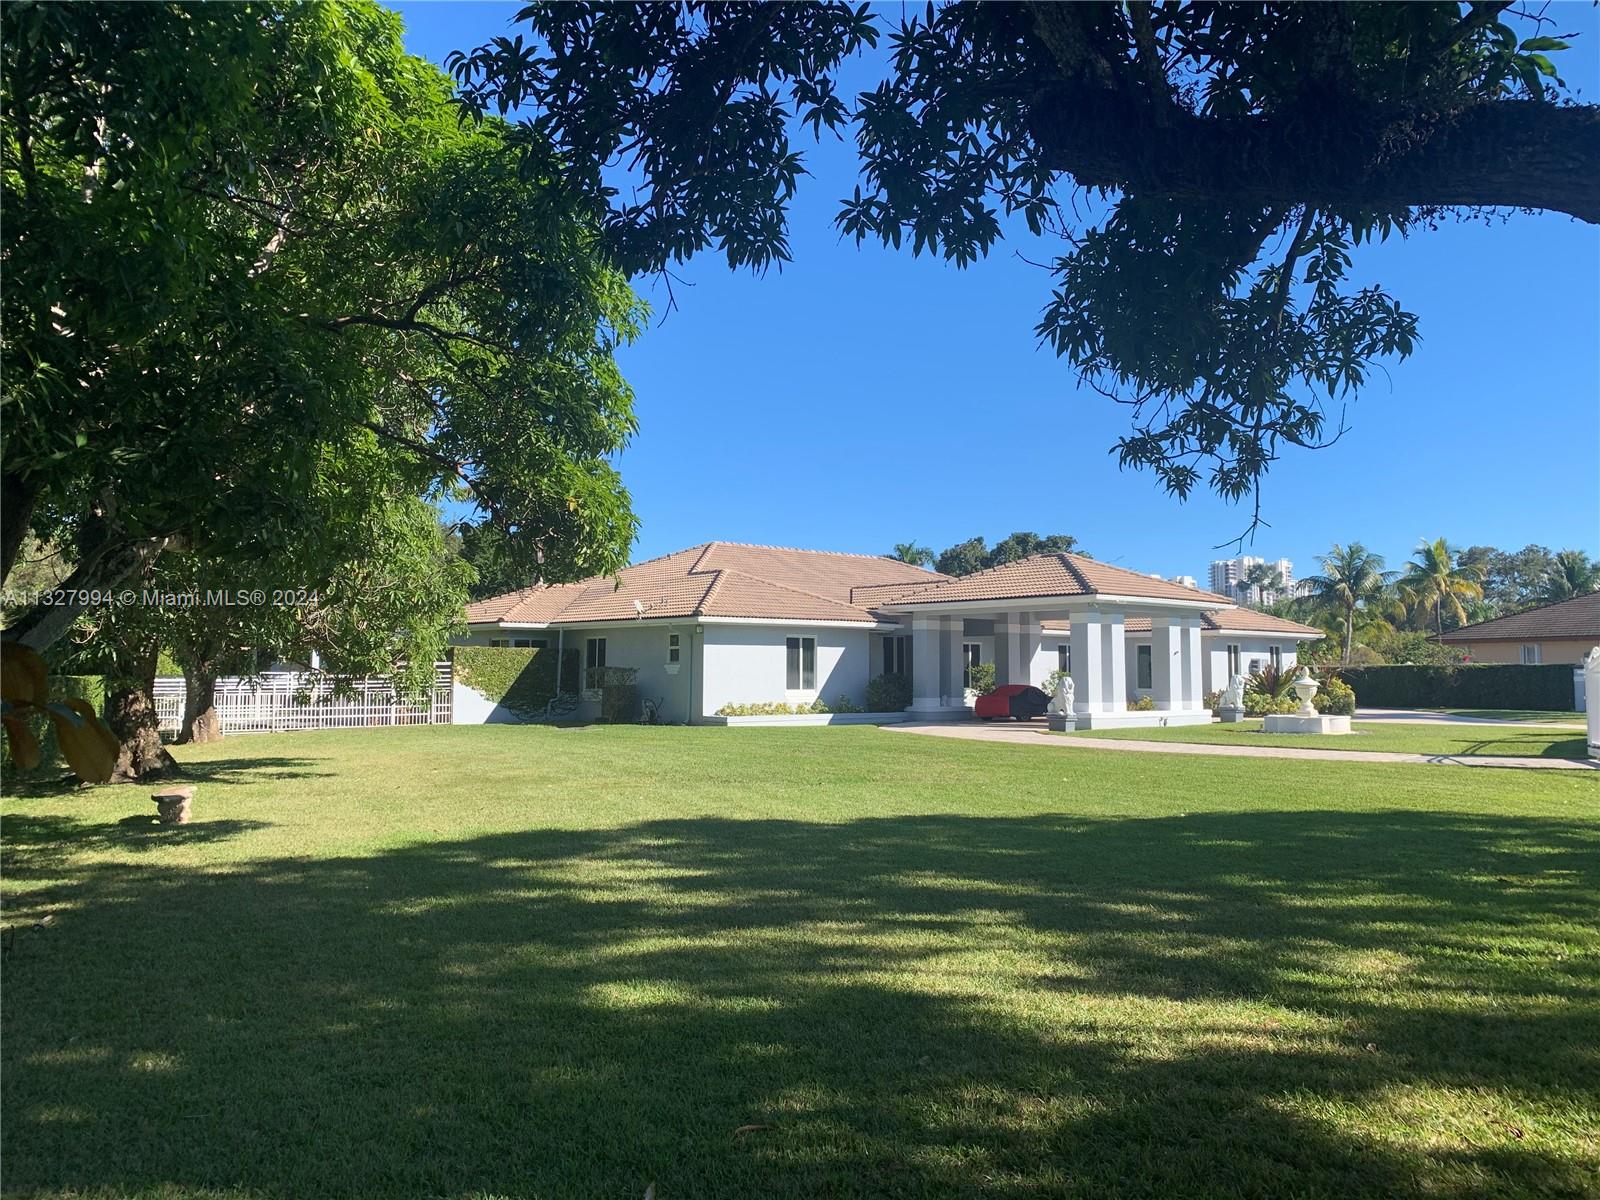 LOW INVENTORY OPPORTUNITY:1 story traditionally remodeled w/impressive grounds.4,785 liv sq ft/6,280 under roof(appraiser sketch). Only home at end of a cul-de-sac/1 of 4 on the block,walled/2 gates,4-zone A/C(2015-22),painted in '22, complete marble floor('13),NEW kitchen/Miele('13),complete impact win/doors/solar reflective('21),36kw Generac quiet generator/1,000 gallon tank('14),volume ceilings,'44 heated lap pool/pool deck('14),summer kitchen w/Viking stove('16).2car garage,2car porte cochere,3-4 car awning car port,no hurricane evac for cat 1-3/'95 post Andrew build code,not in flood zone,close to 3 highways,high rated schools. Attic storage,LED lights('15),bath(2013). Ca.closets('12),tank & tankless water heaters. 3 spas.Exercise/Game room.Formal liv./din. rooms.Fruit trees.NO​​‌​​​​‌​​‌‌​‌‌‌​​‌‌​‌‌‌​​‌‌​‌‌‌ HOA.